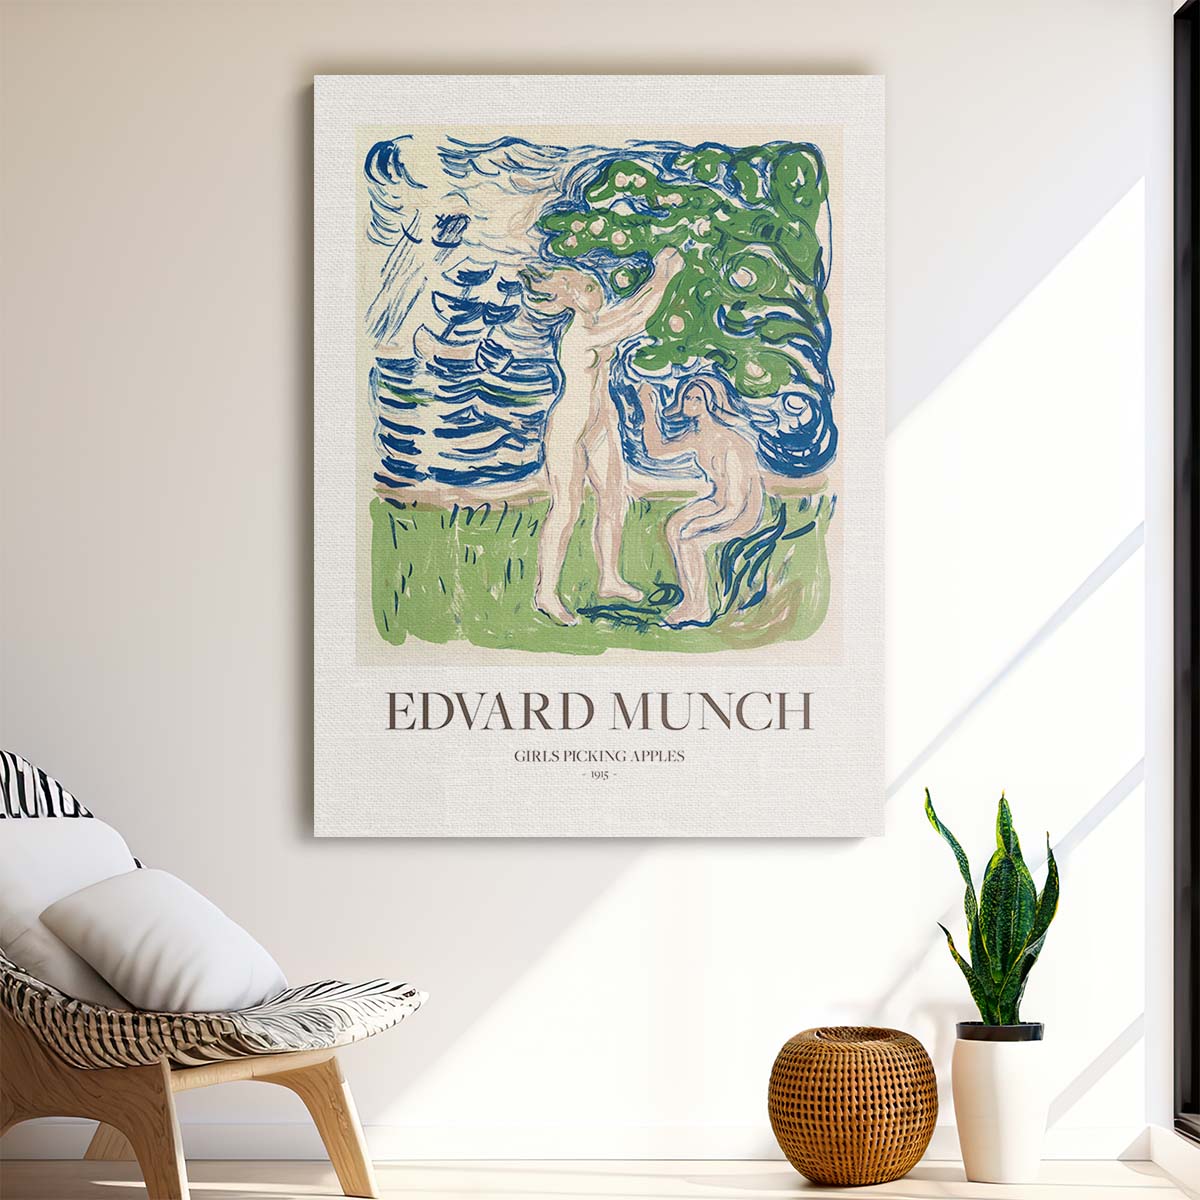 Edvard Munch's 1915 Acrylic Girls Picking Apples Painting Poster by Luxuriance Designs, made in USA